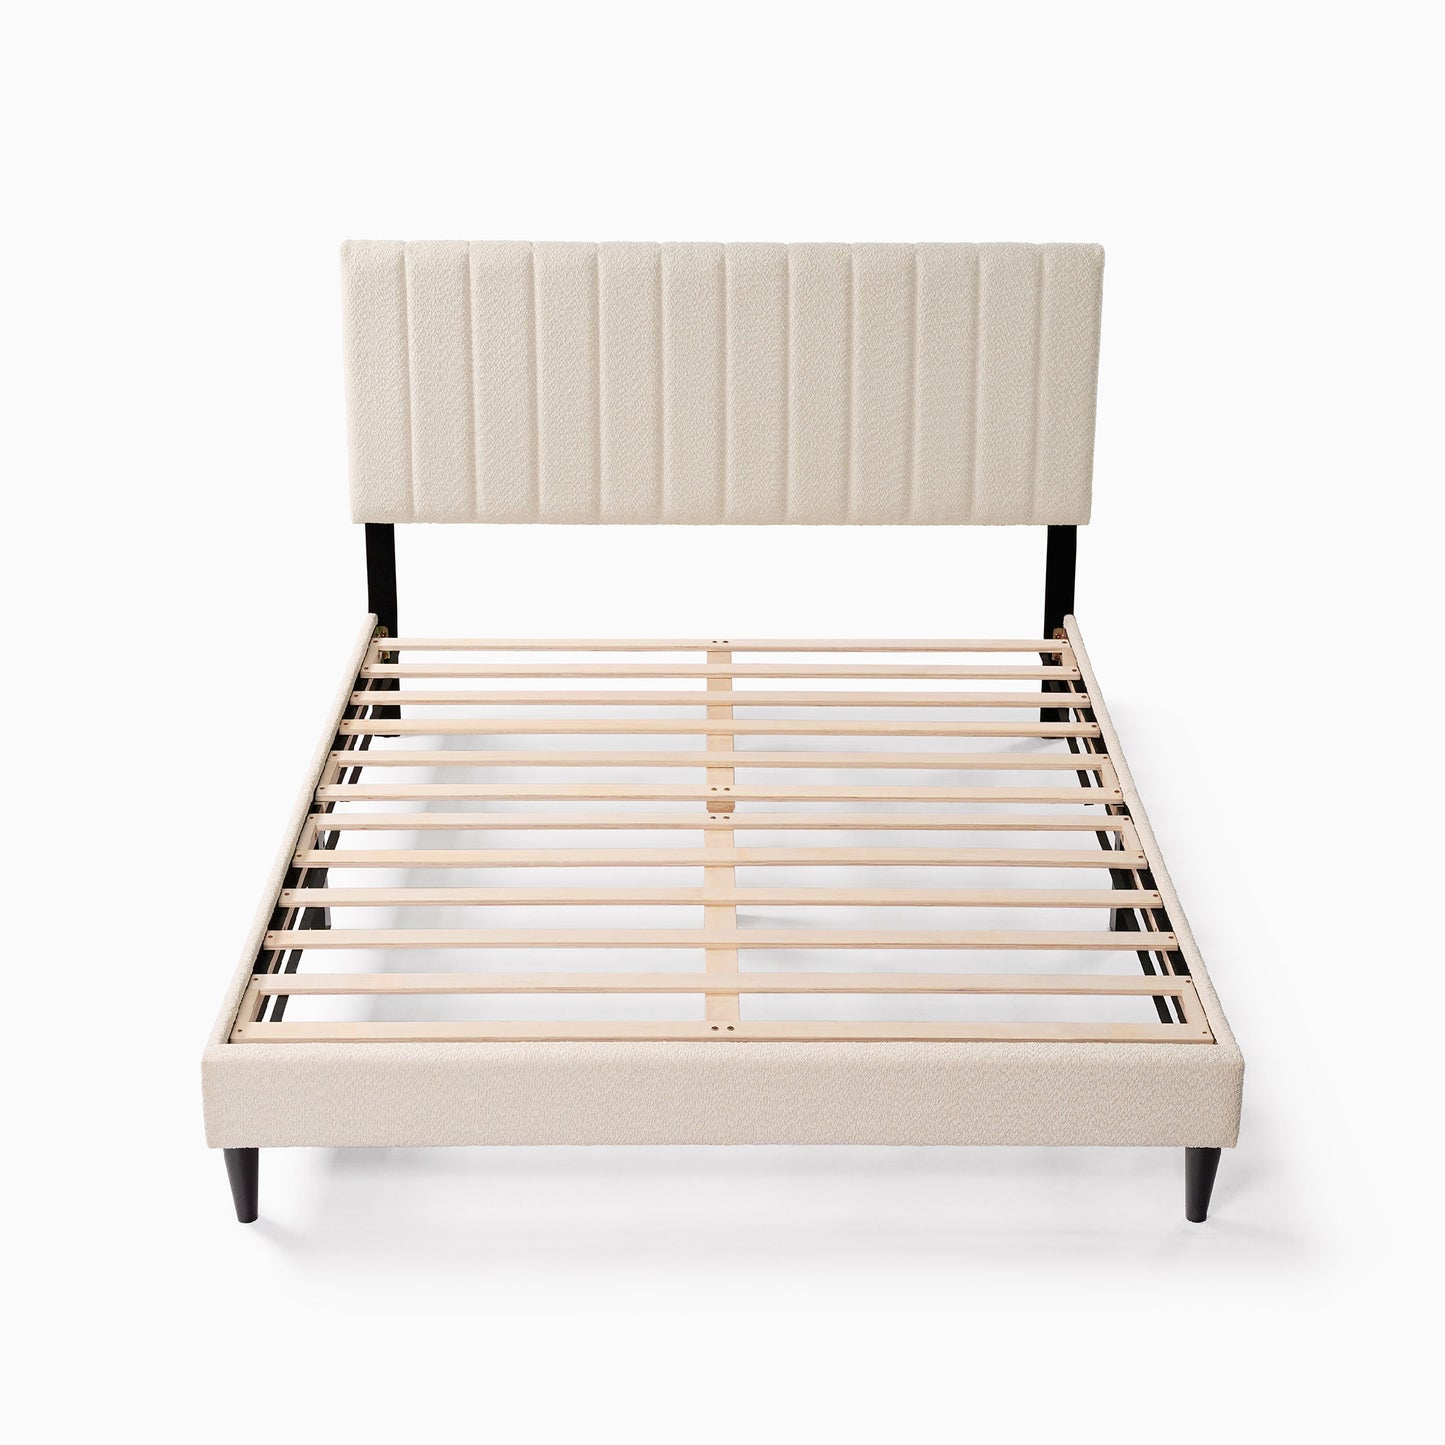 dove tufted upholstered platform bed - pearl white - queen